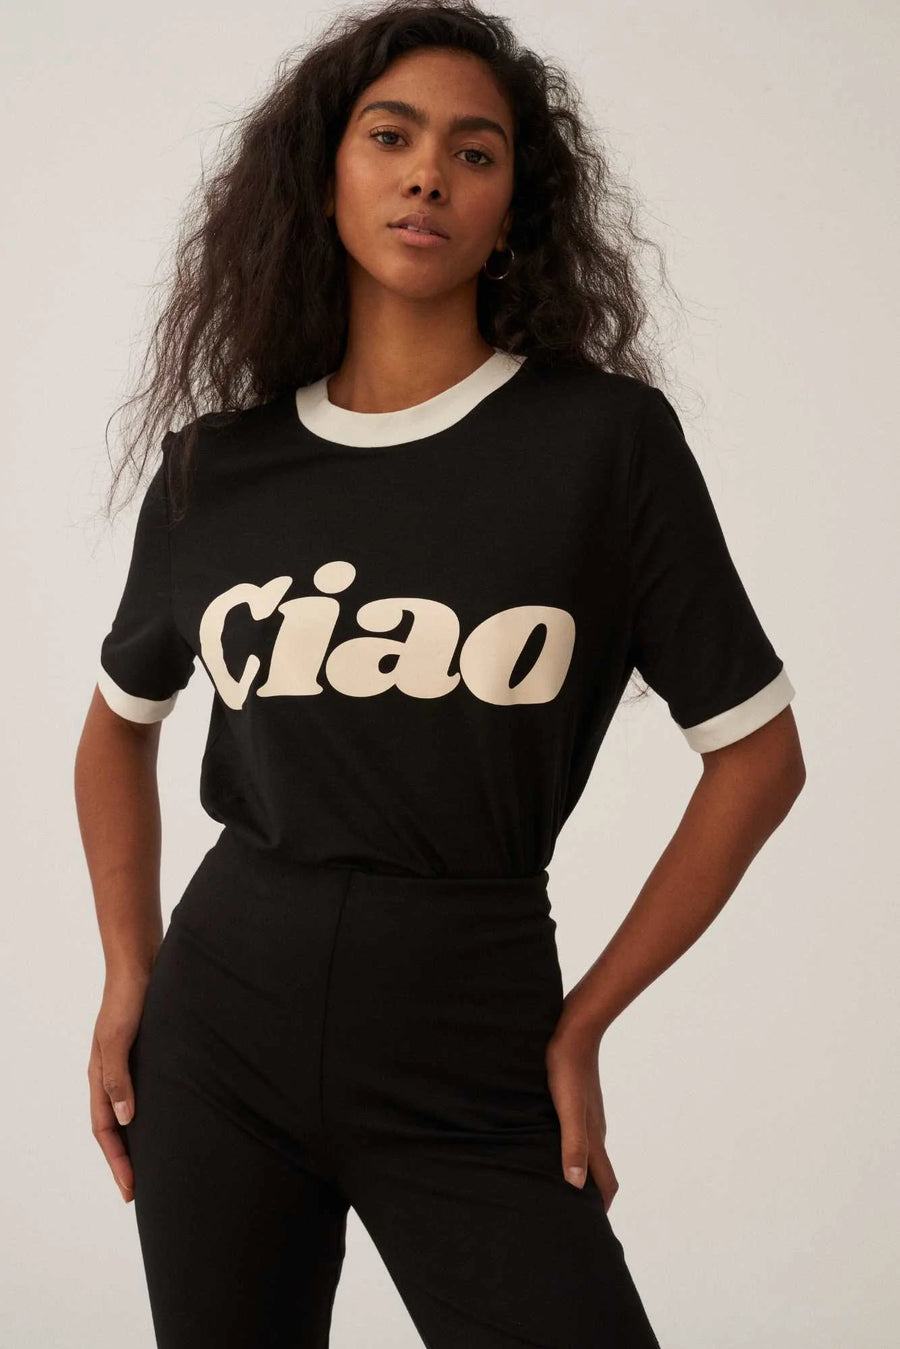 Les Goodies - She Is Sunday Ciao Tee Black